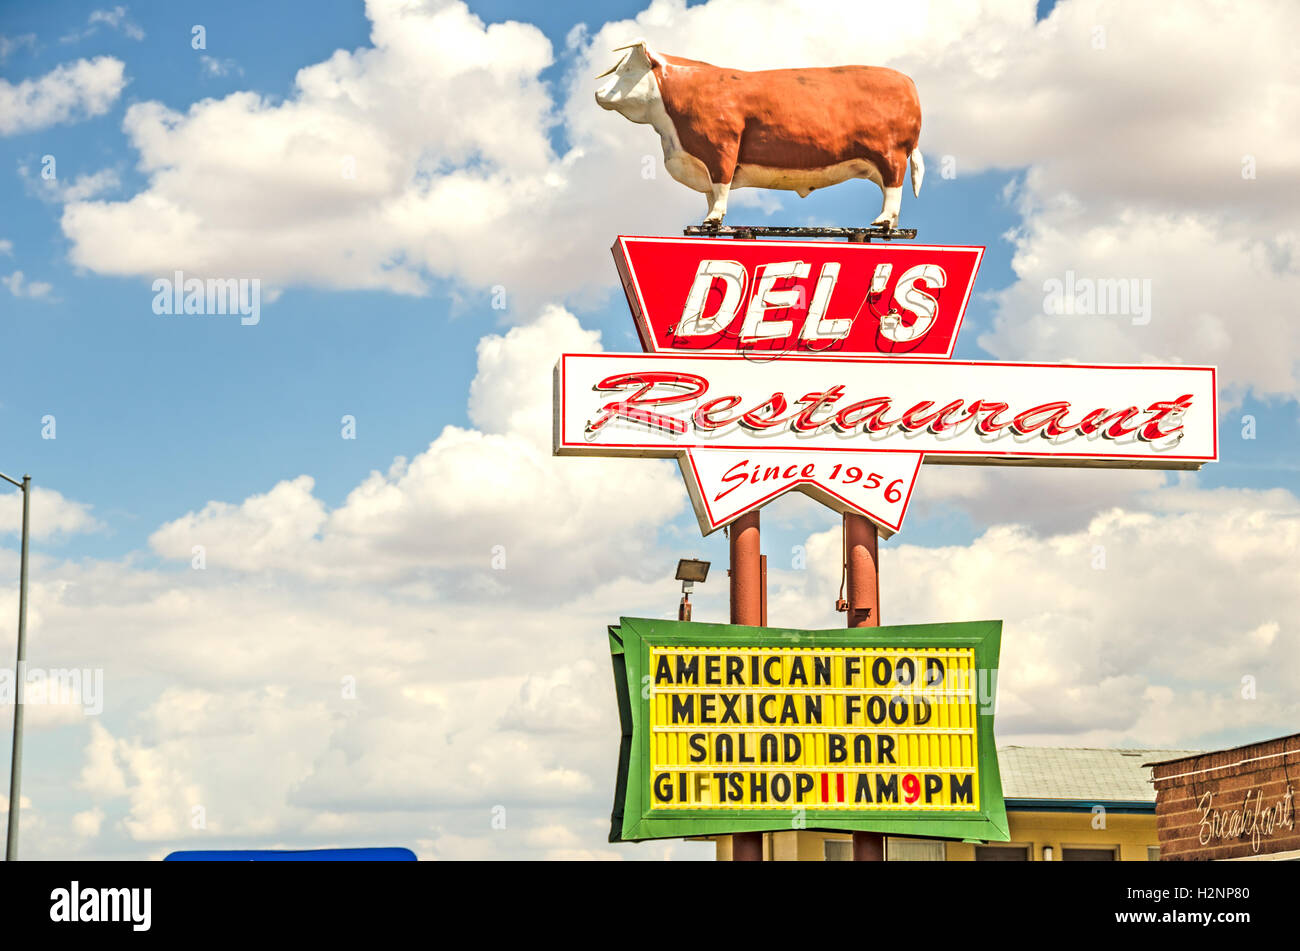 TUCUMCARI, NEW MEXICO - AUGUST 25, 2013: Photo of the sign for Del's Restaurant Stock Photo